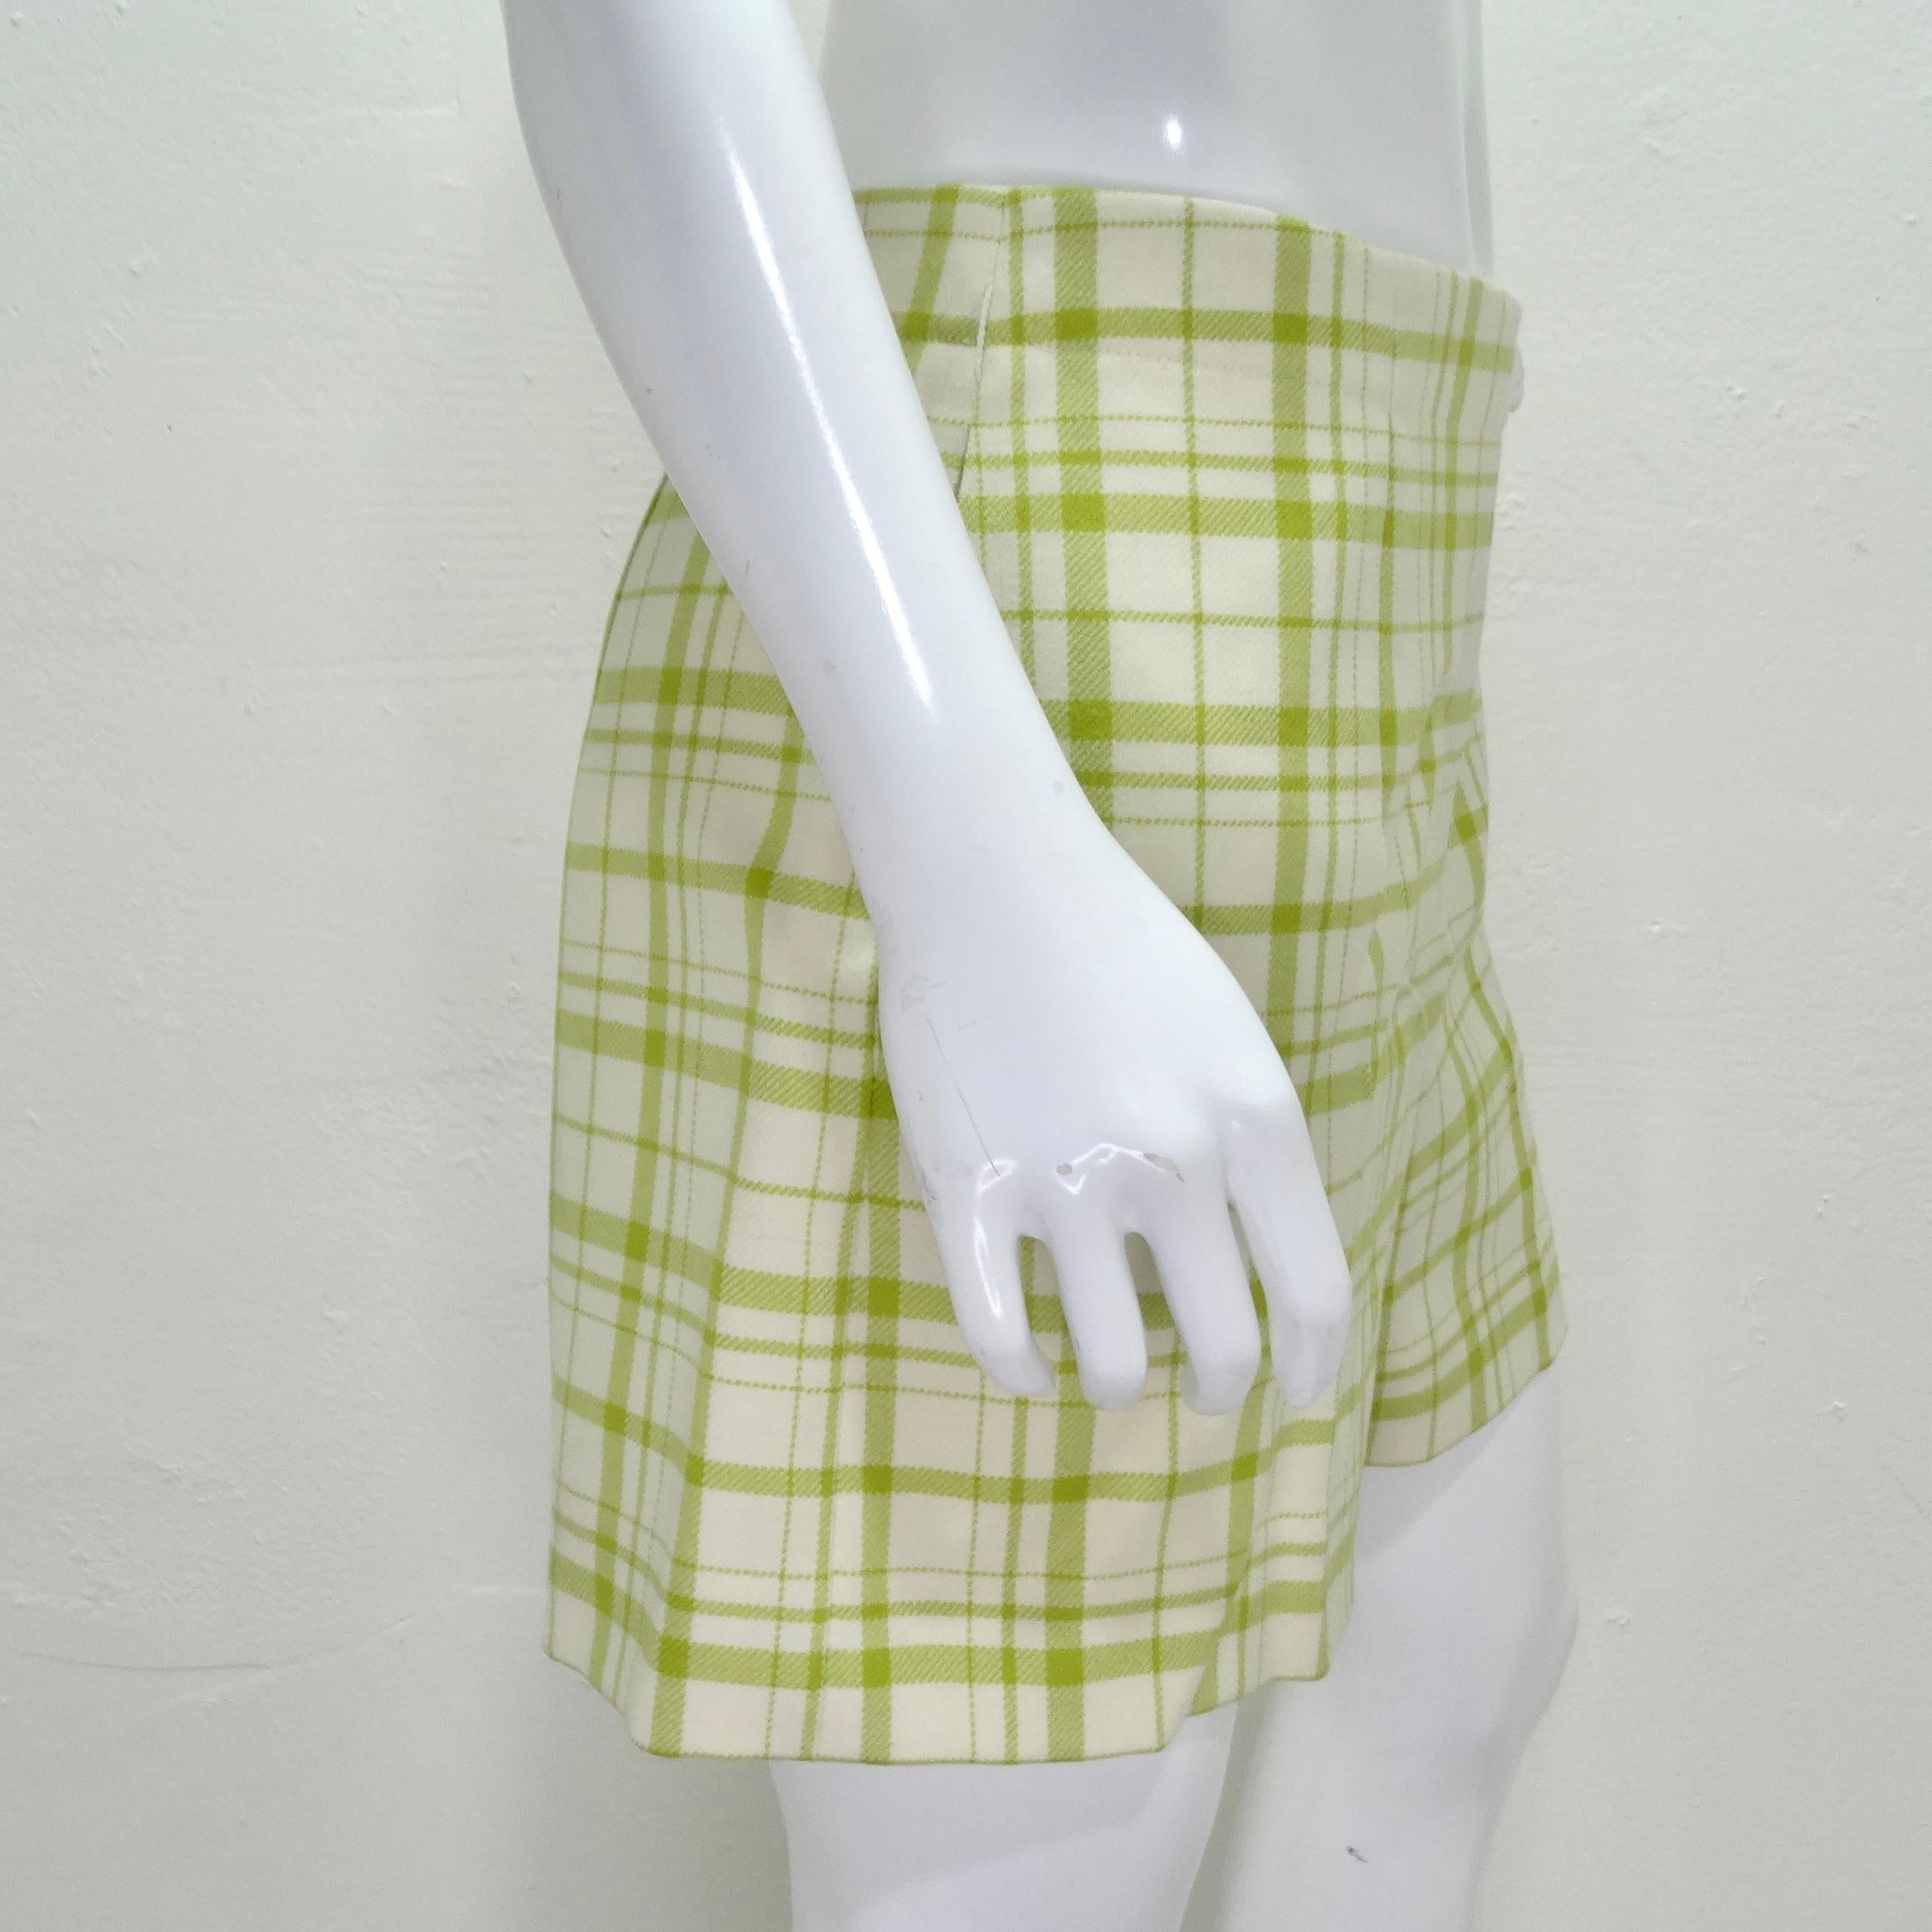 Christian Dior Plaid Wool Shorts In Excellent Condition For Sale In Scottsdale, AZ